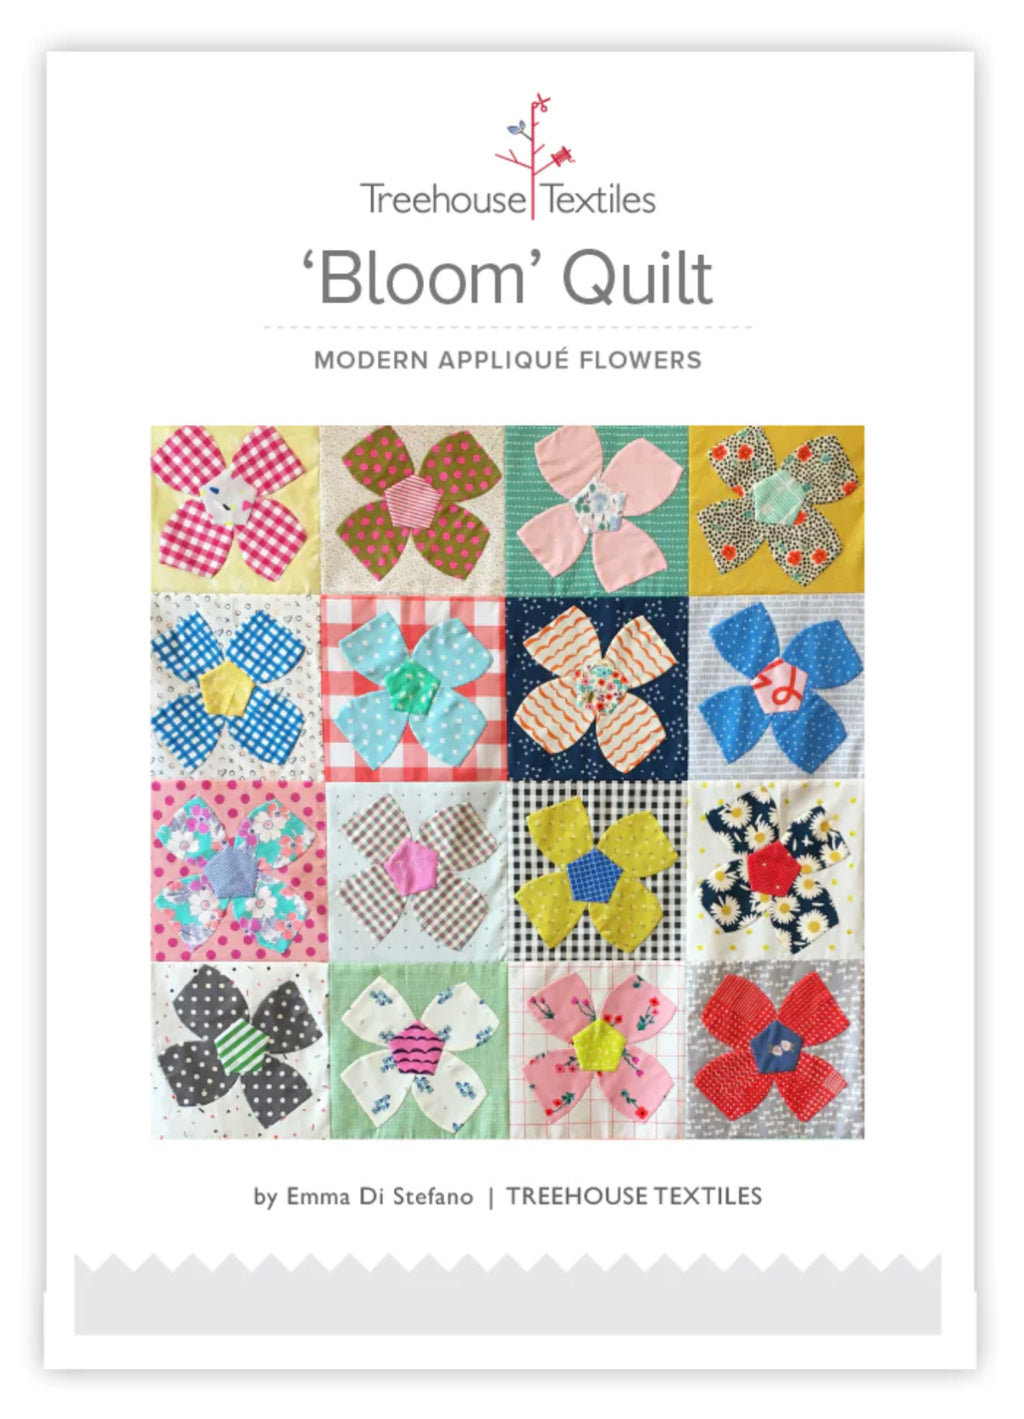 Treehouse Textiles/ Bloom Quilt pattern